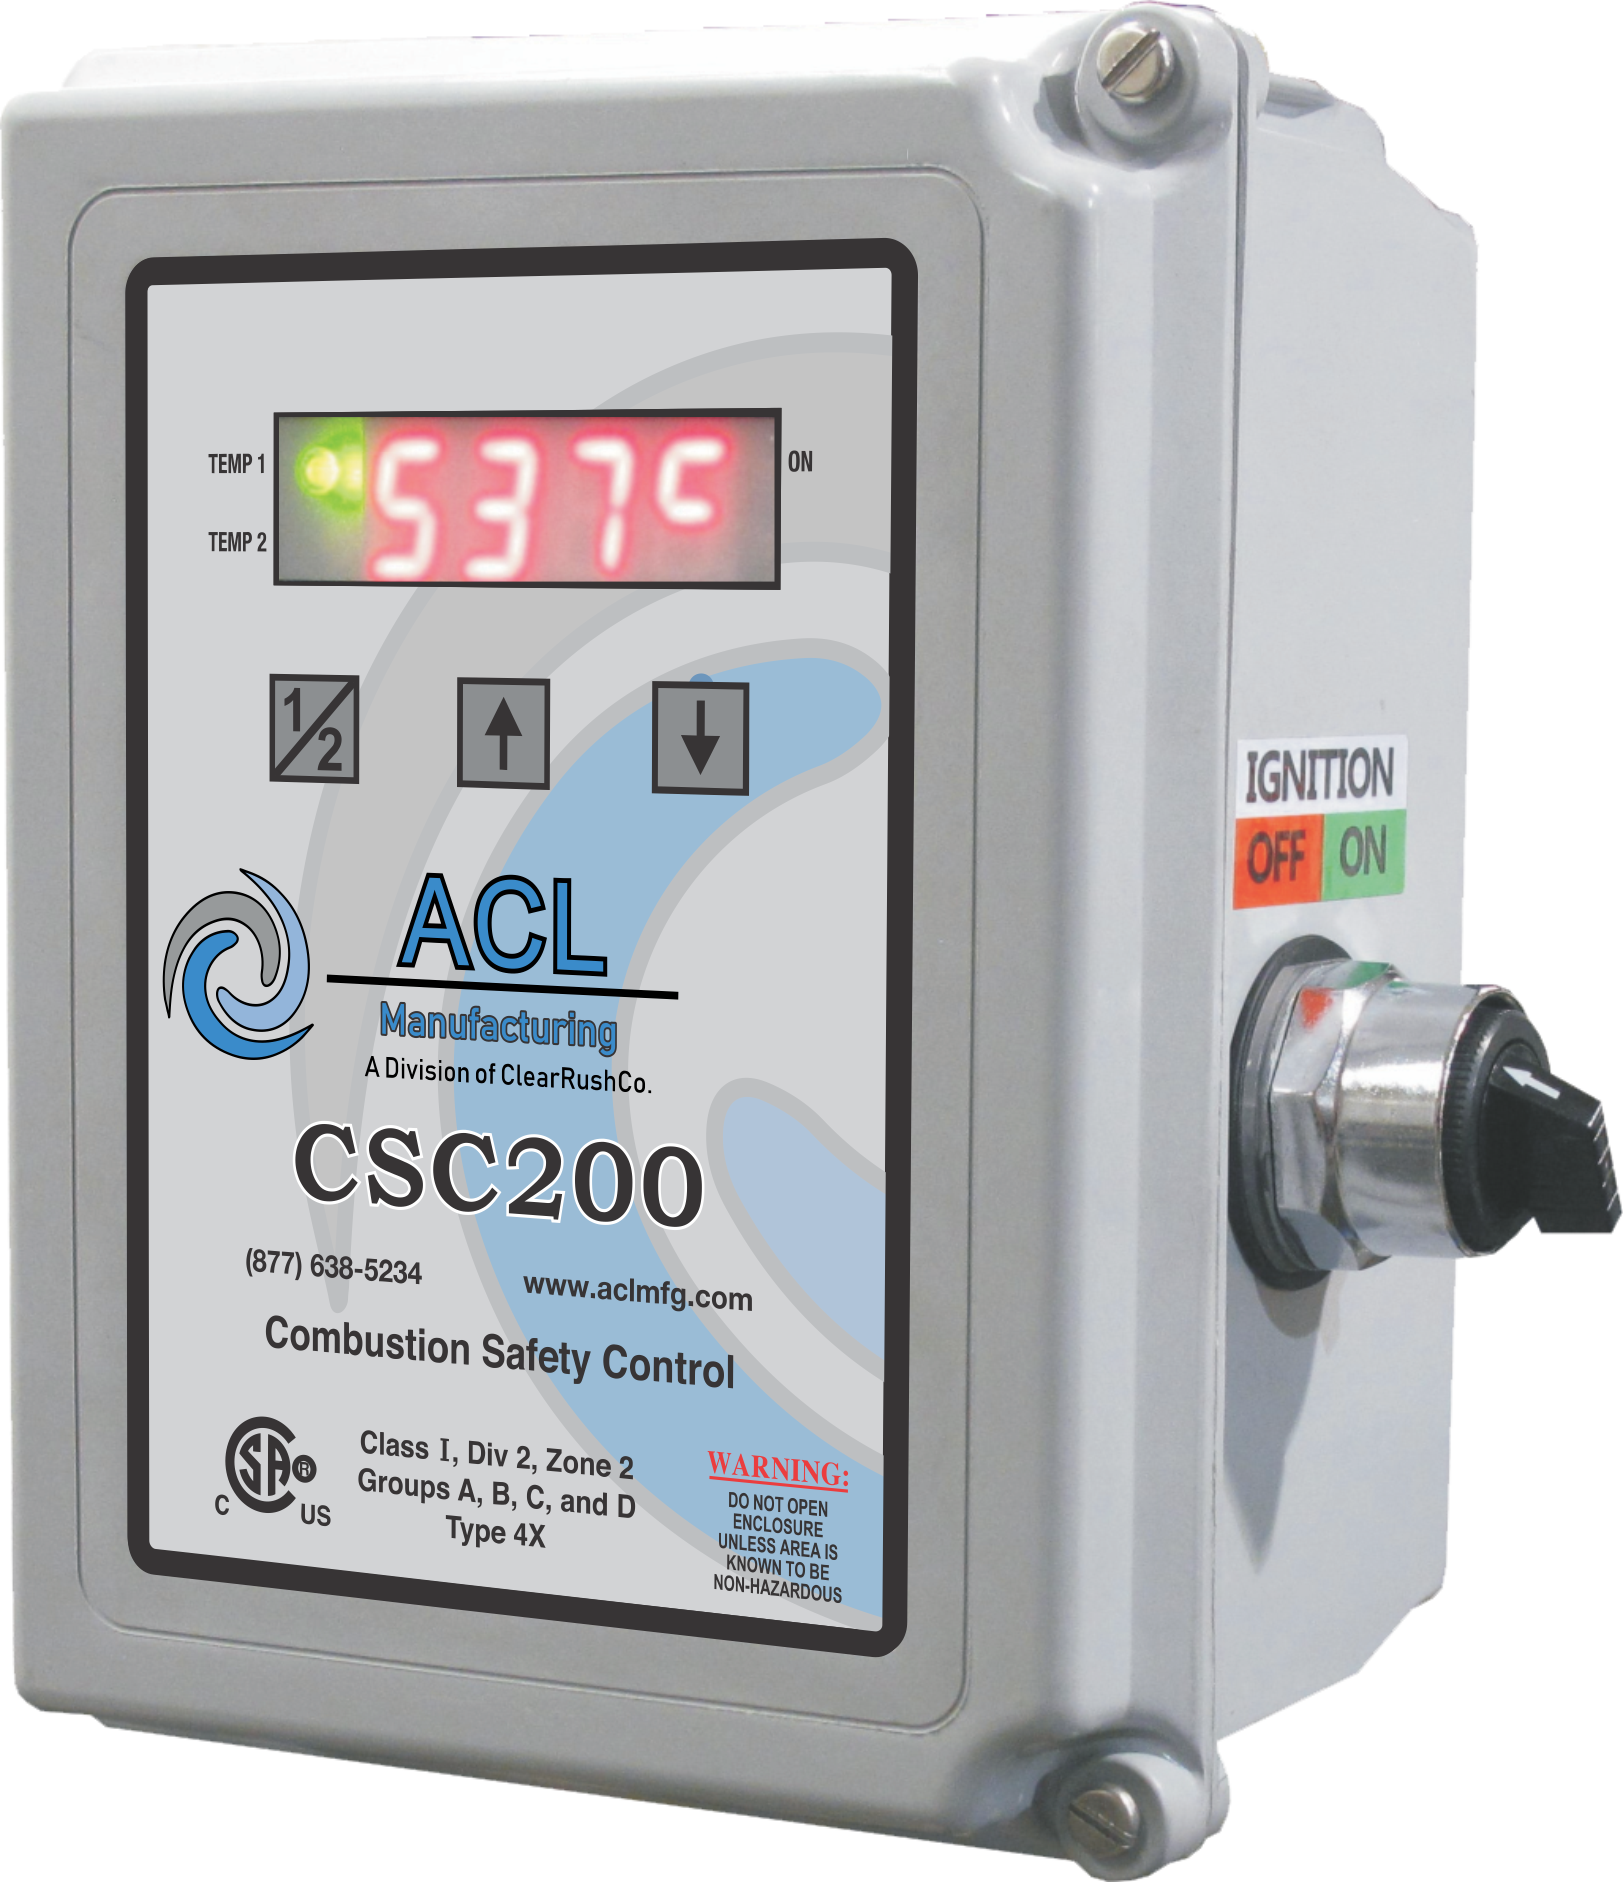 ACL CSC 200 Burner Management Systems/Combustion Safety Controller